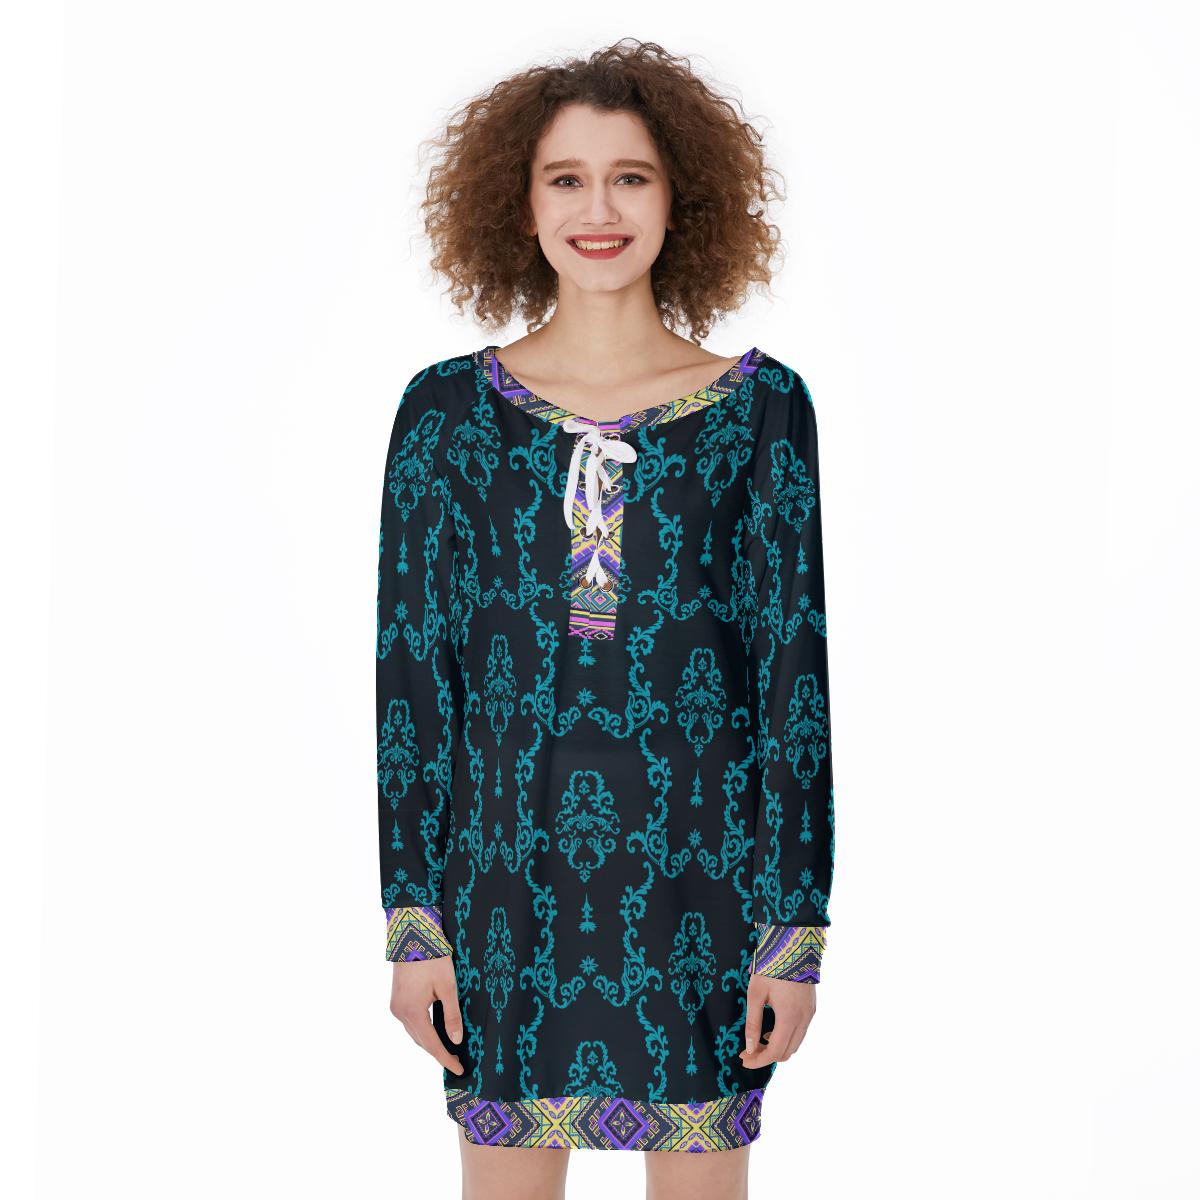 Blue Green Floral Geometric Decorative Ornament Abstract Women's Lace-Up Sweatshirt